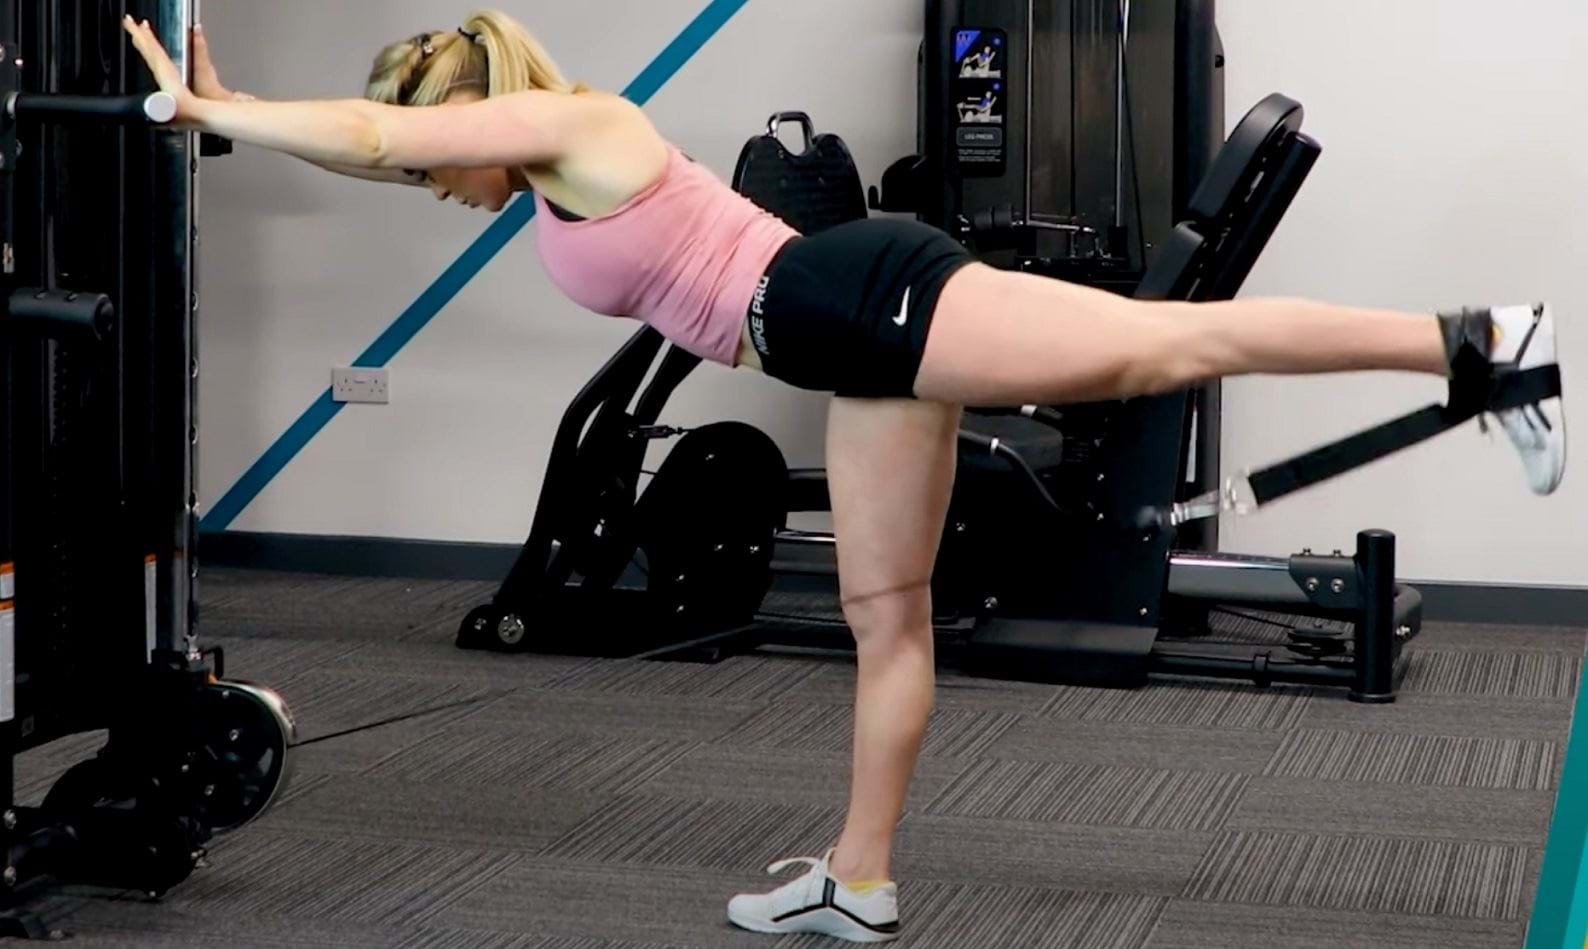 Personal Trainer demonstrating how to do cable kickbacks, a glute focused exercise